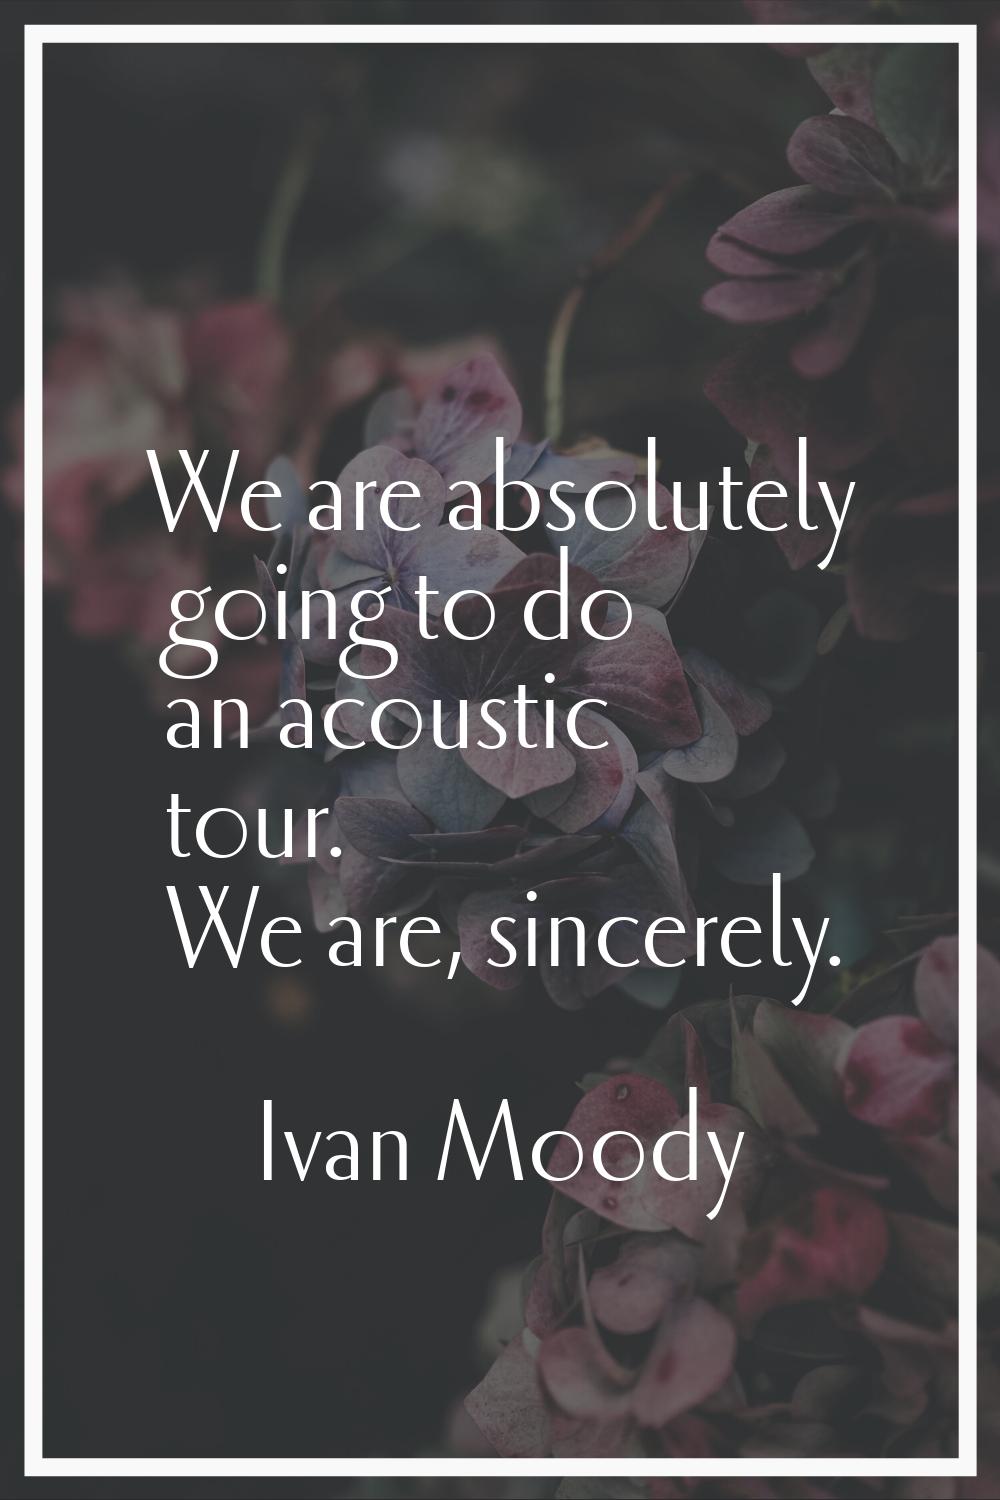 We are absolutely going to do an acoustic tour. We are, sincerely.